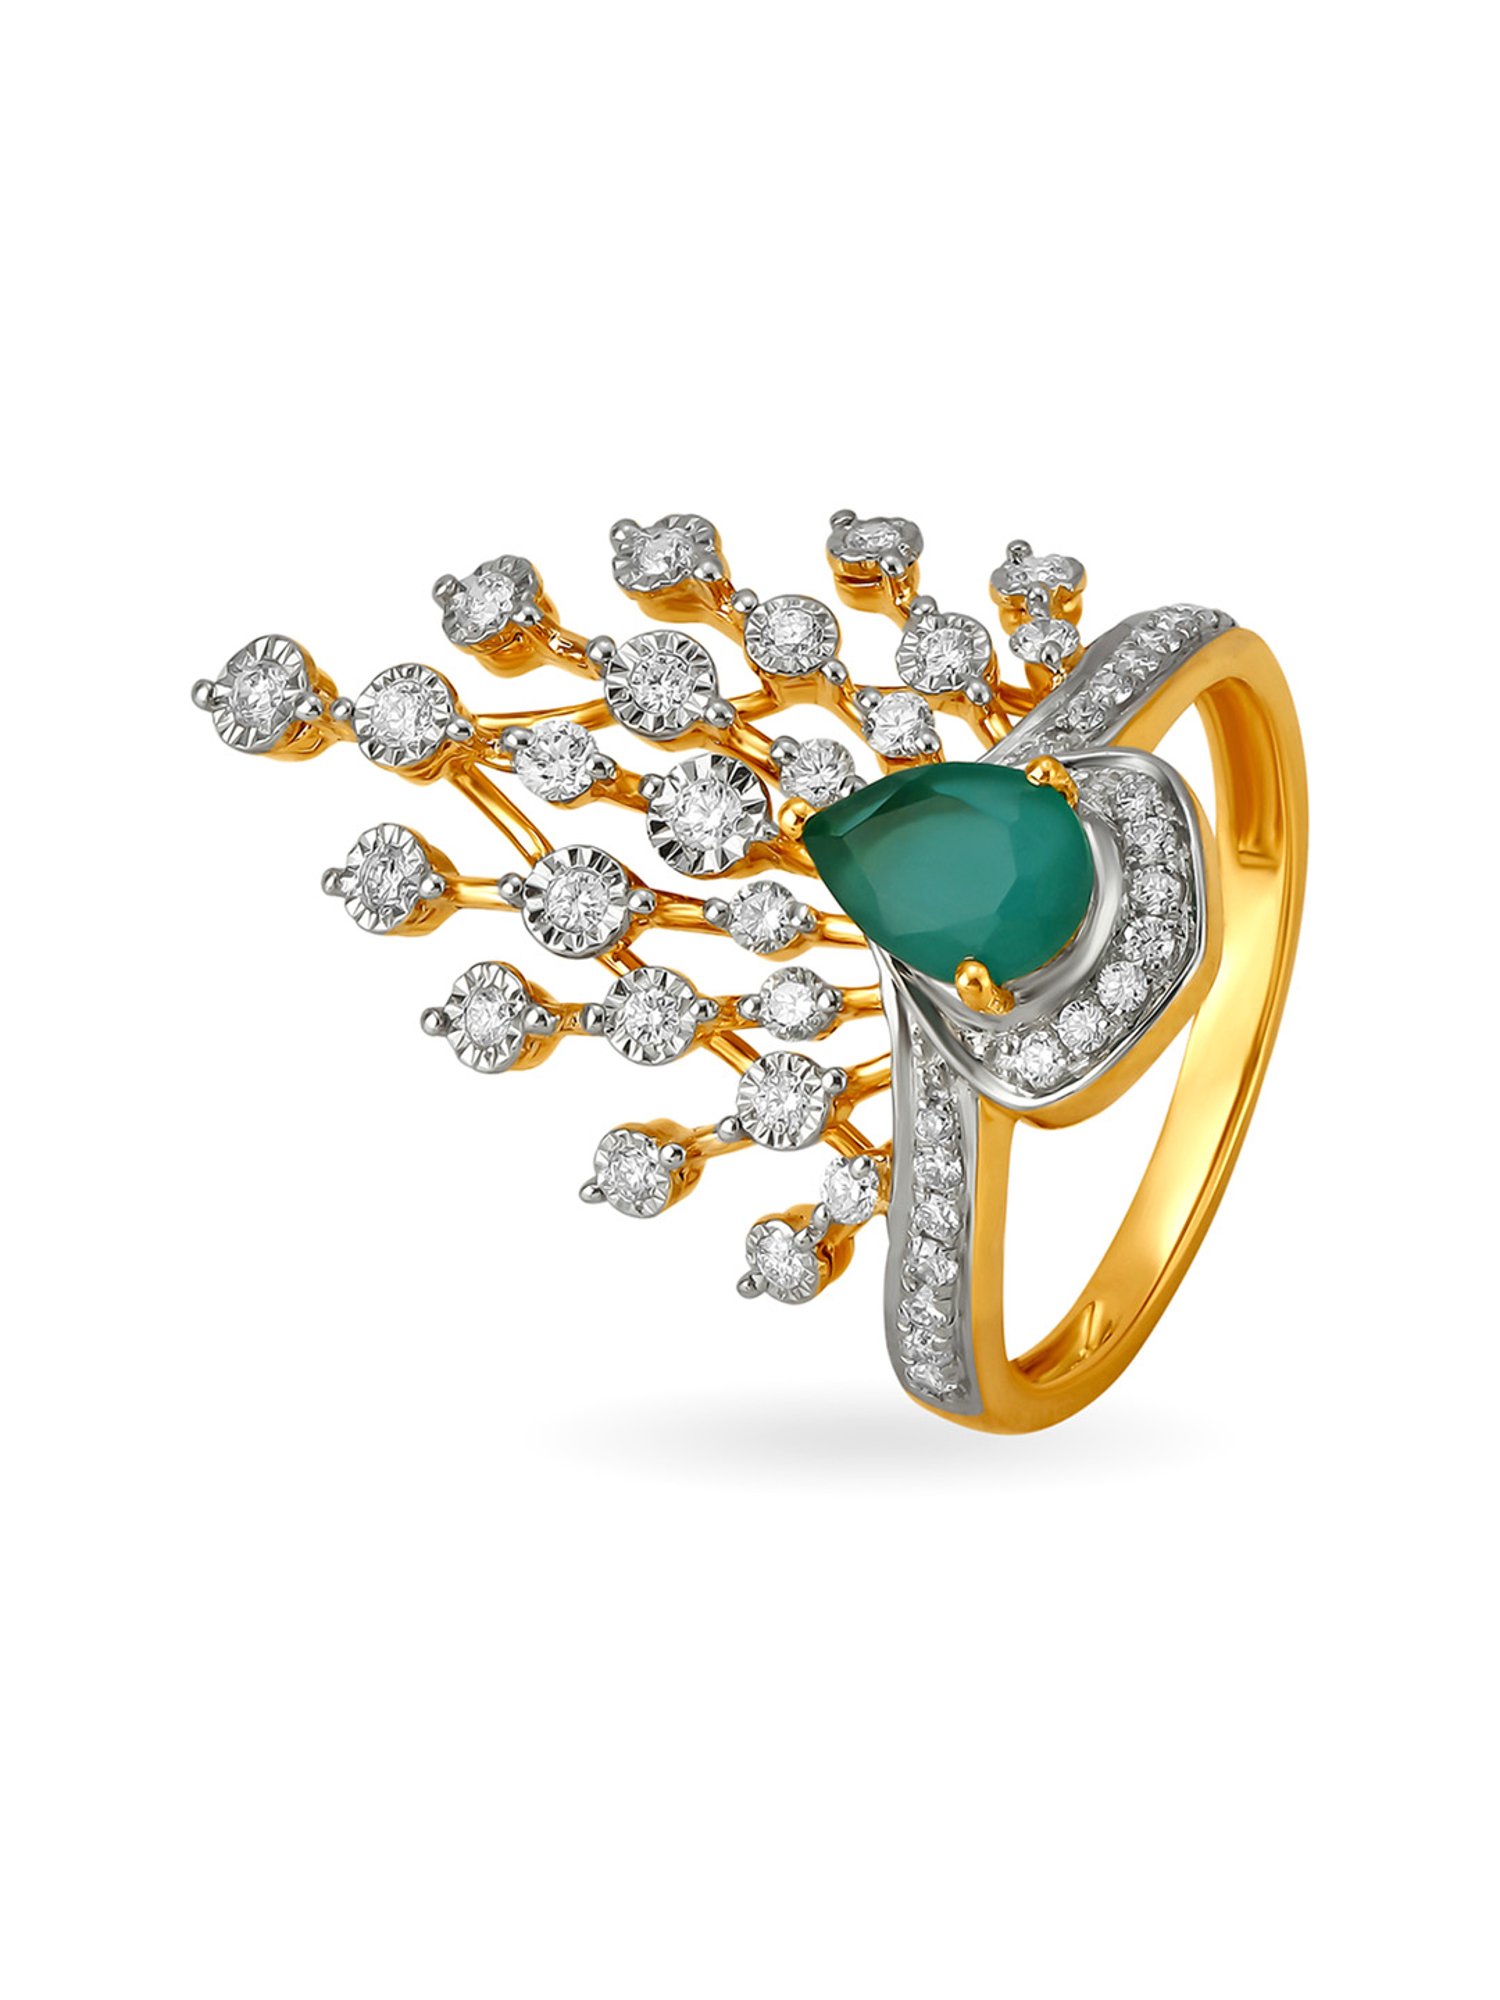 TANISHQ Charming Multi Stone Ring in Panchkula - Dealers, Manufacturers &  Suppliers - Justdial